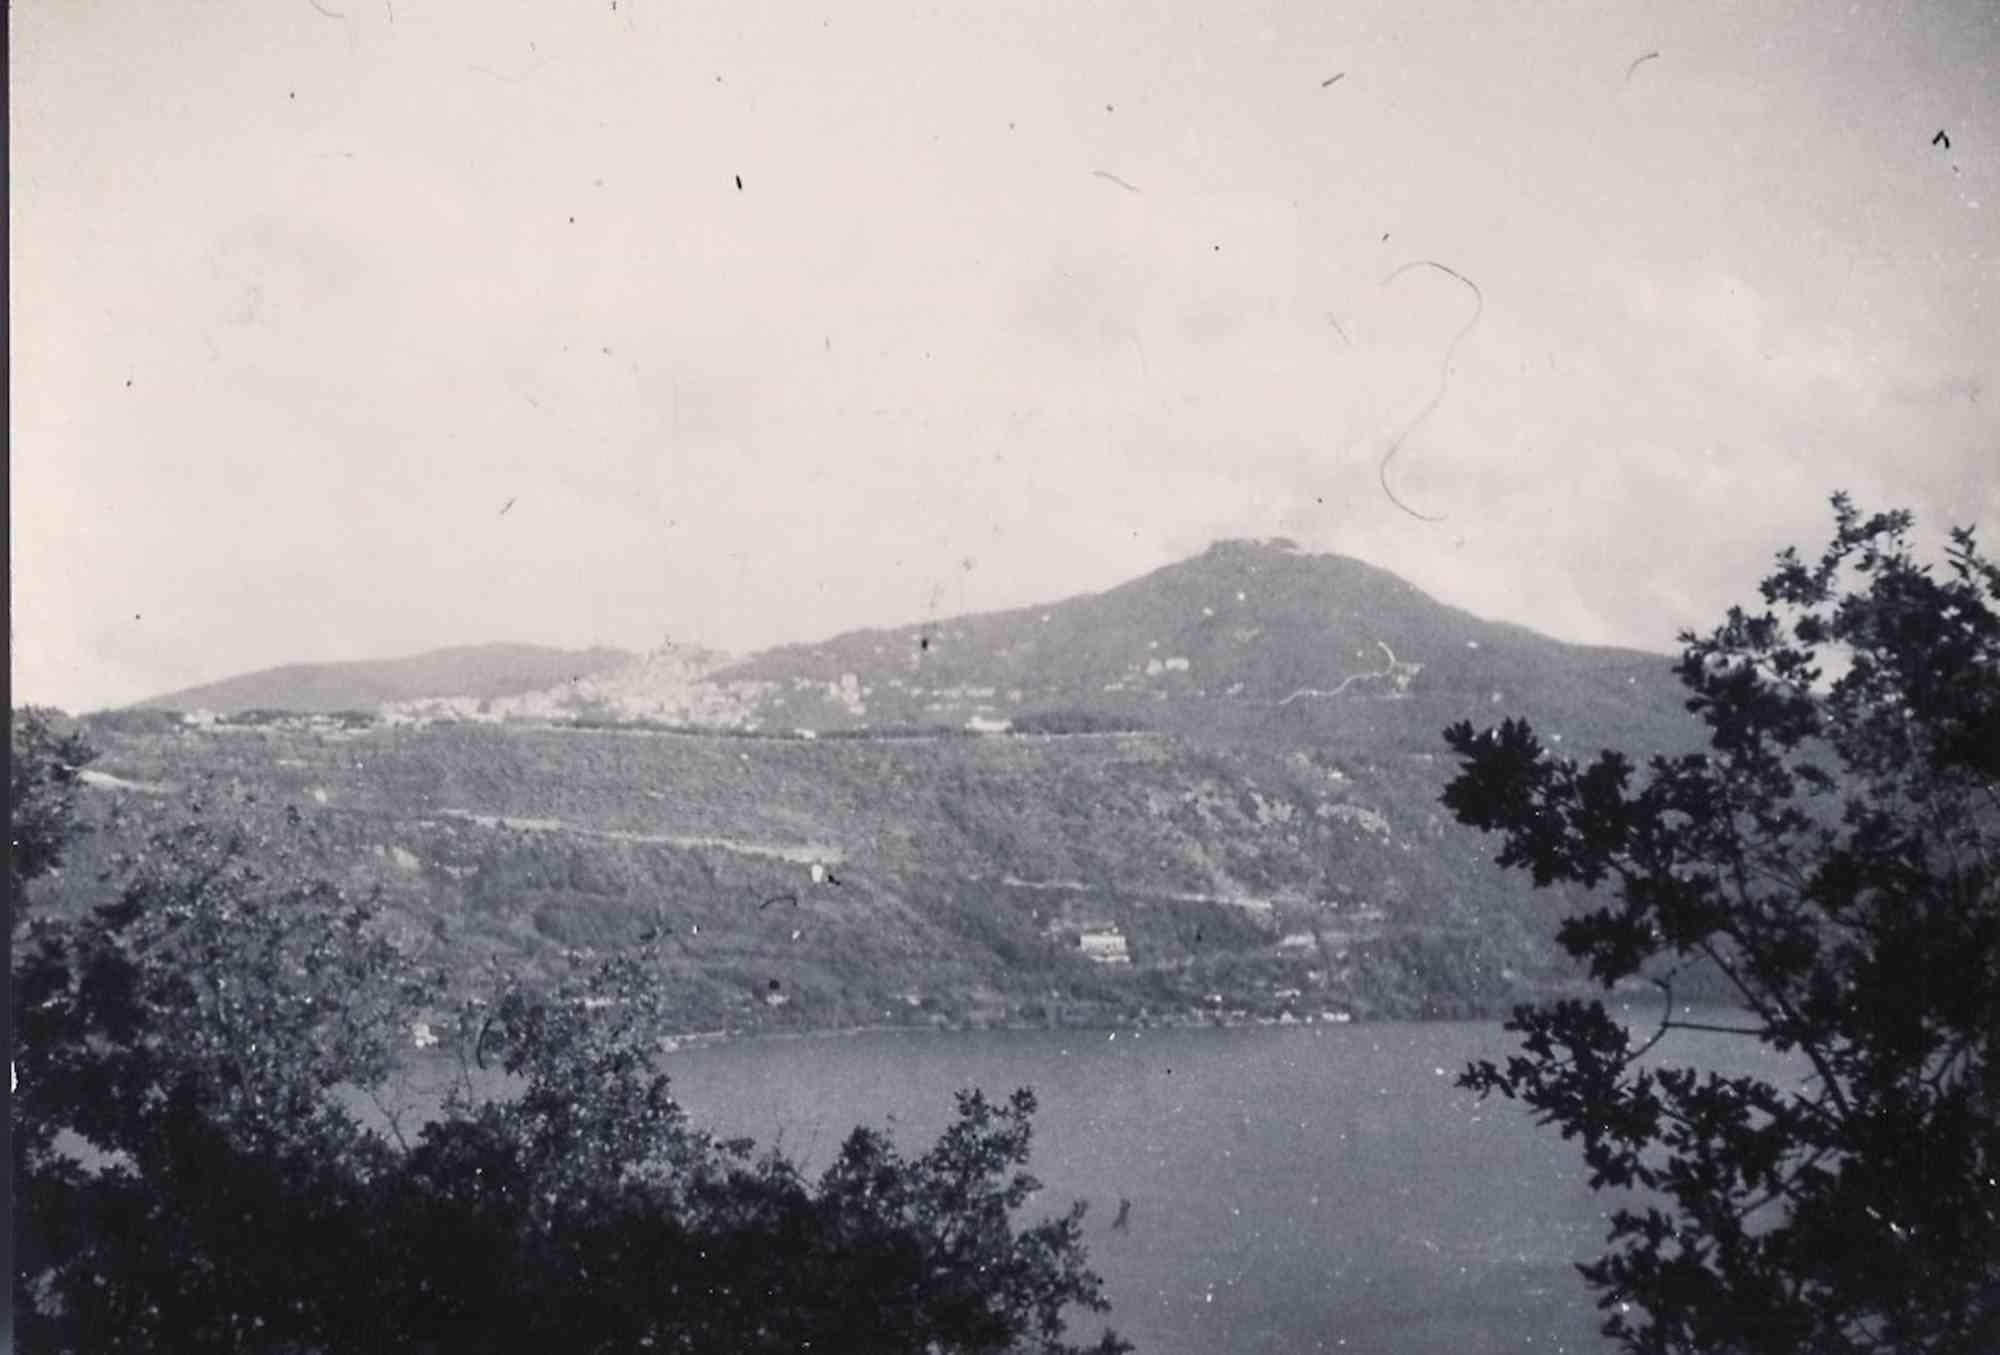 Unknown Landscape Photograph -  Old Days Photo - Mountain - Vintage Photo - Mid-20th Century